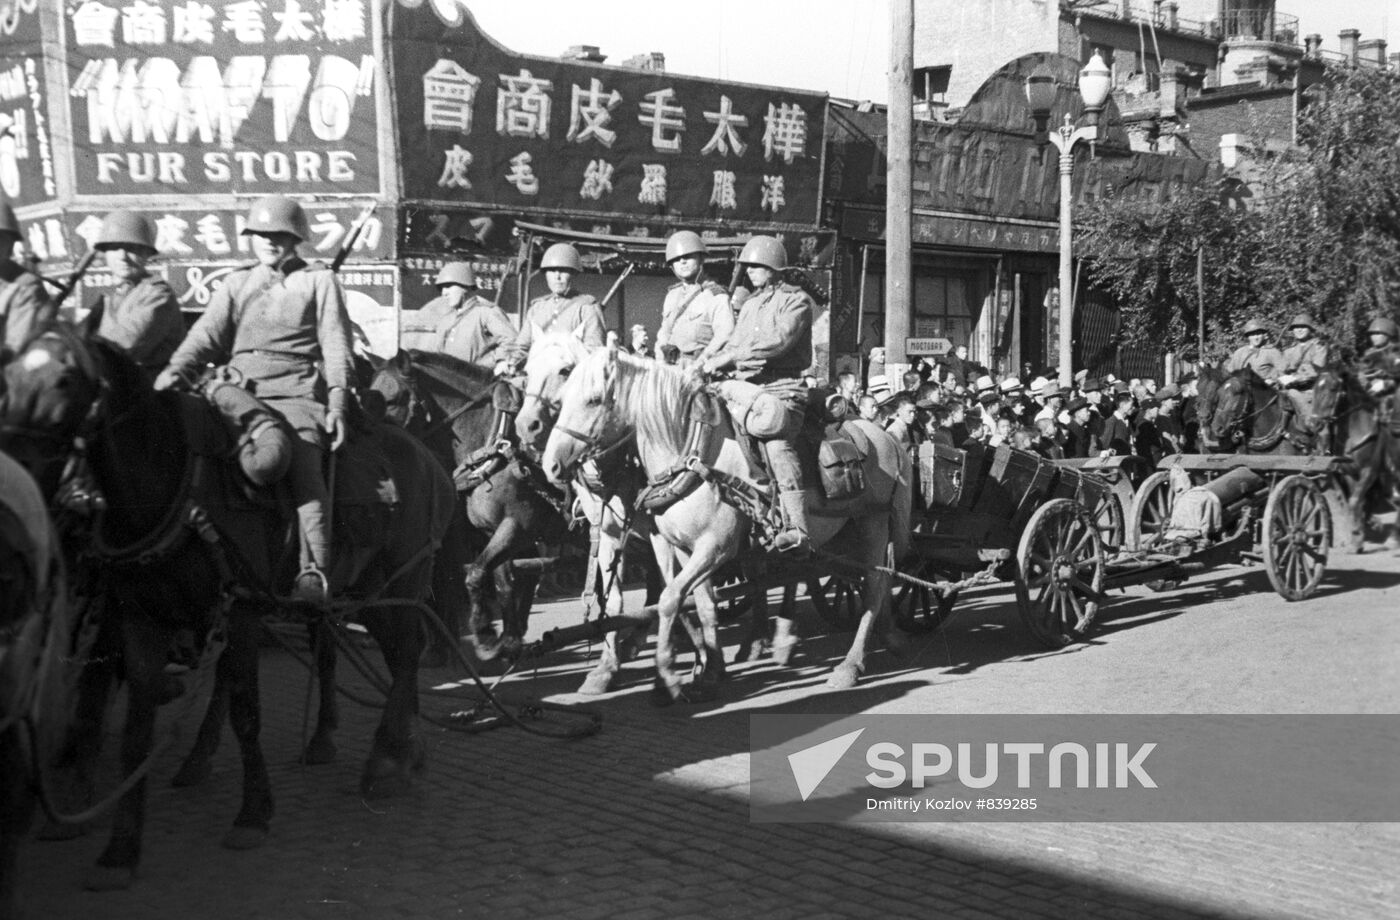 Soviet troops in liberated Mudanjiang